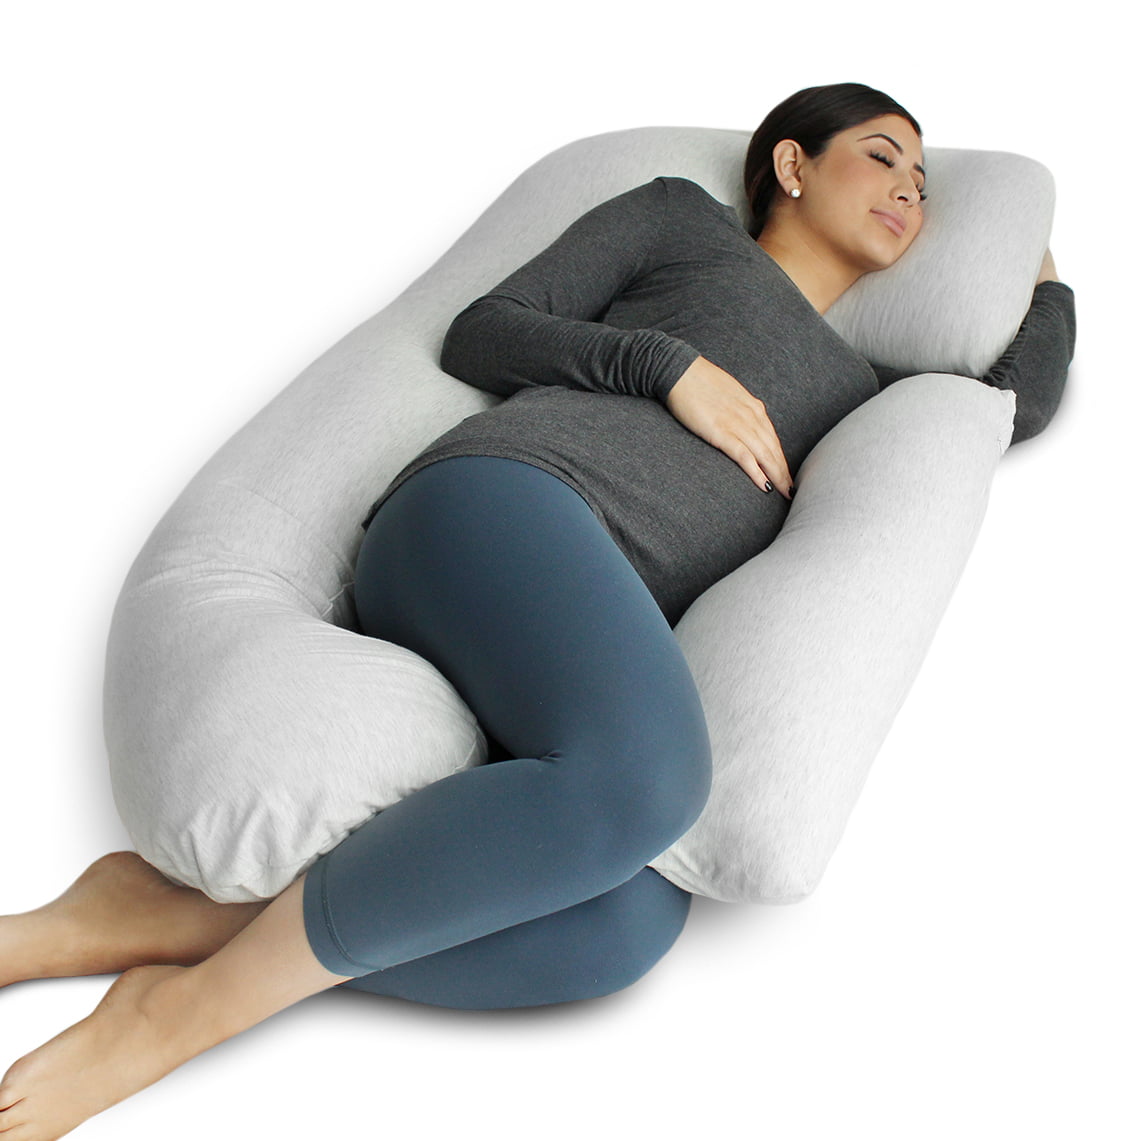 US Women Belly Contoured U-Shaped Pregnancy Pillow Full Body Pillow Pregnant HOT 